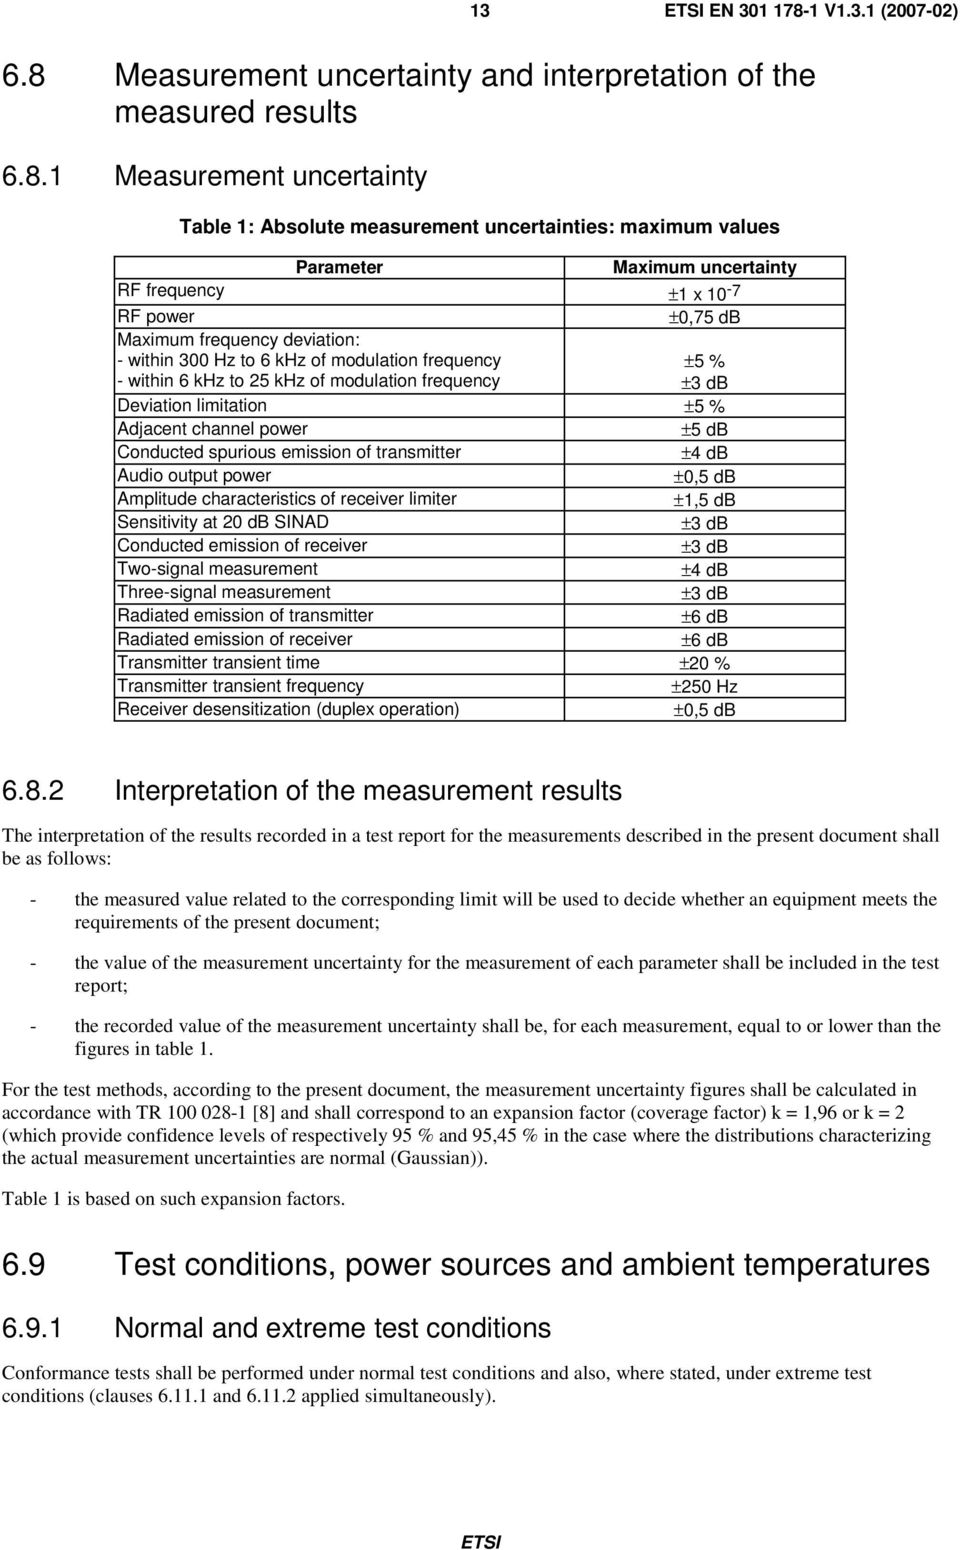 Measurement uncertainty and interpretation of the measured results 6.8.